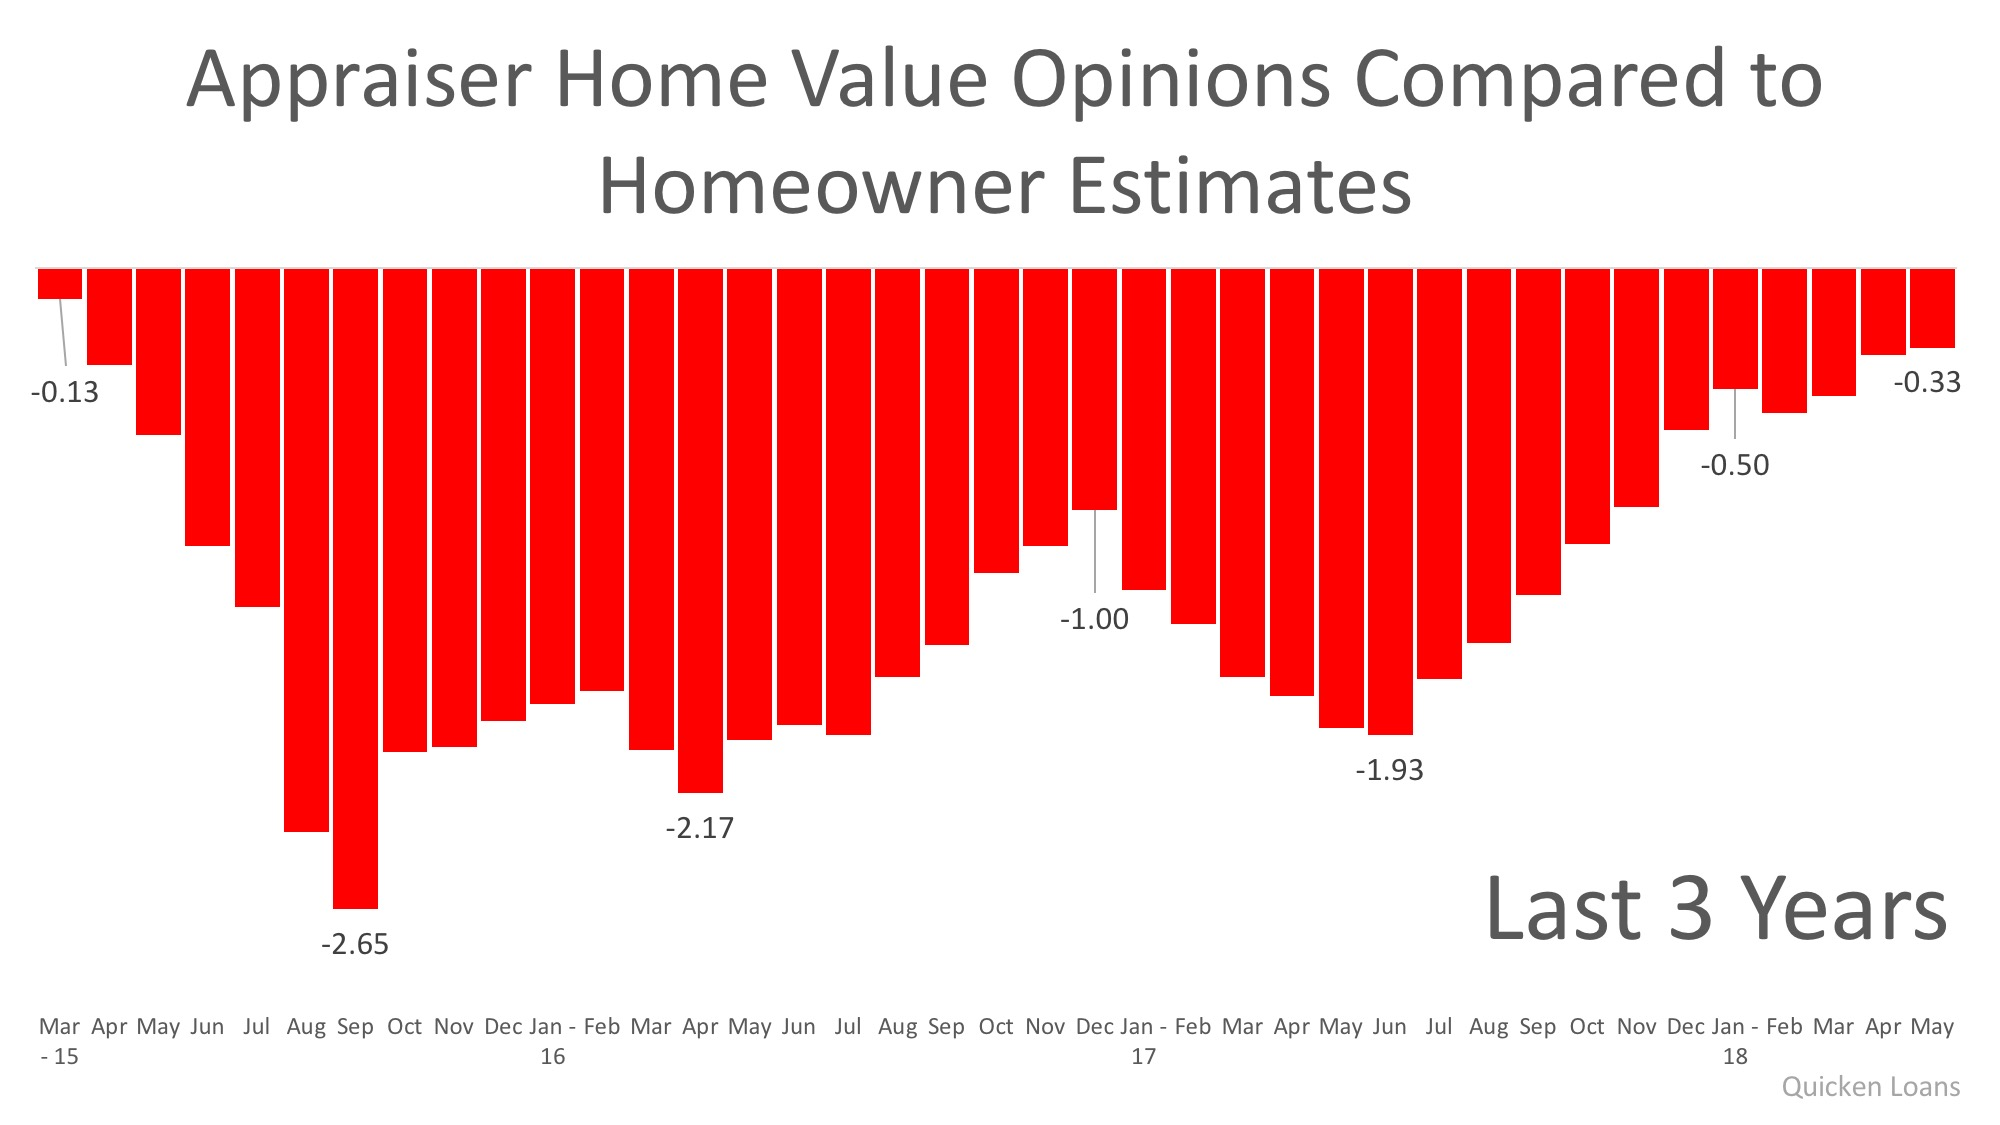 Homeowners & Appraisers See the Most Eye-to-Eye on Price in 3 Years